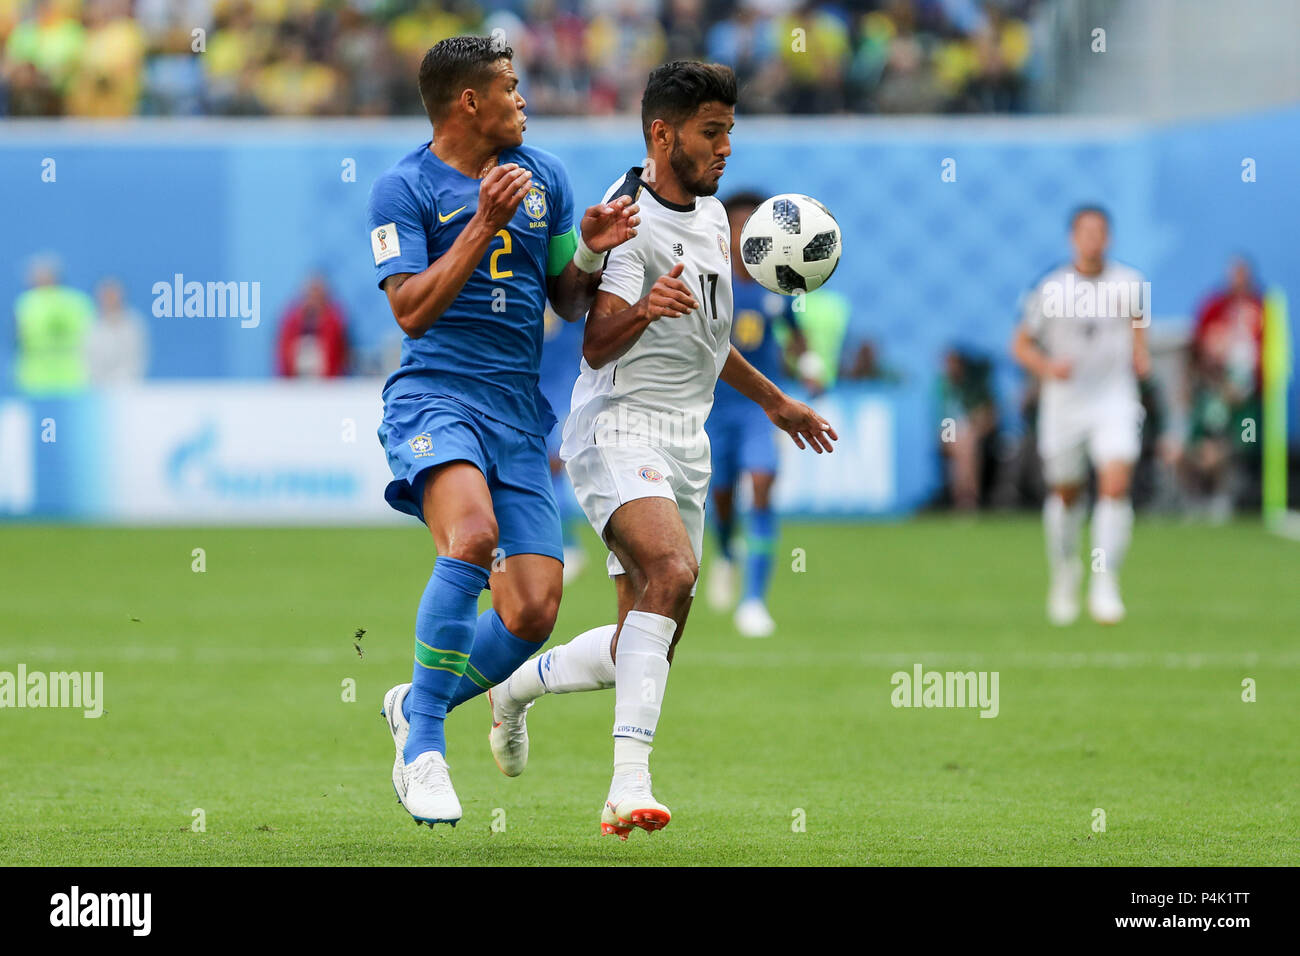 Sao Petesburgo, Russia. 22nd June, 2018. Thiago Silva of Brasil and Yeltsin Tejeda of Costa Rica during the match between Brazil and Costa Rica for the second round of group E of the 2018 World Cup, held at Saint Petersburg Stadium, St. Petersburg, Russia. Game ended scoreless. Credit: Thiago Bernardes/Pacific Press/Alamy Live News Stock Photo